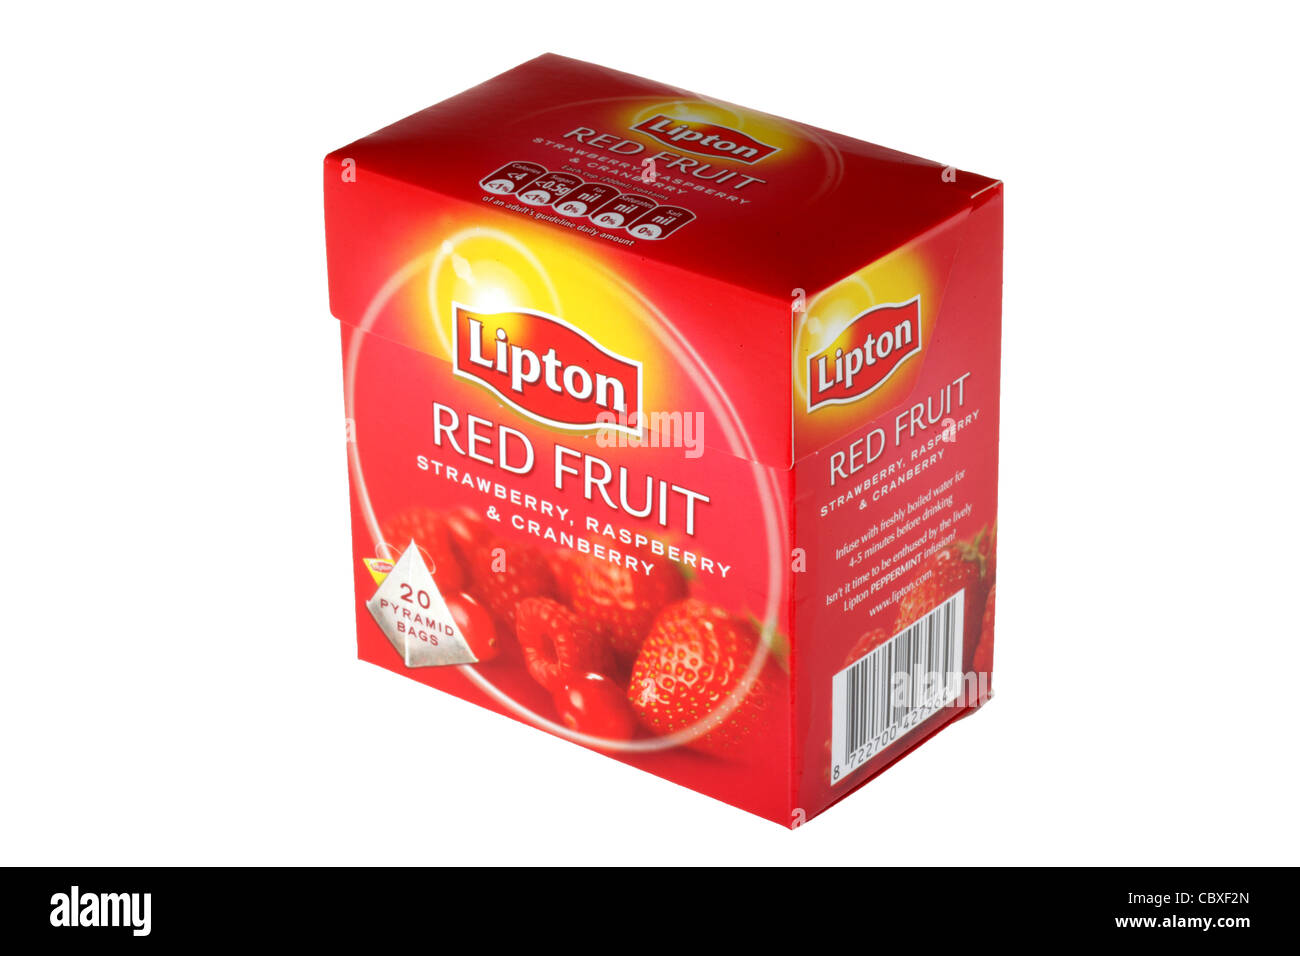 Lipton Red Fruit Tea Bags Isolated Against A White Background With No People And A Clipping Path Stock Photo